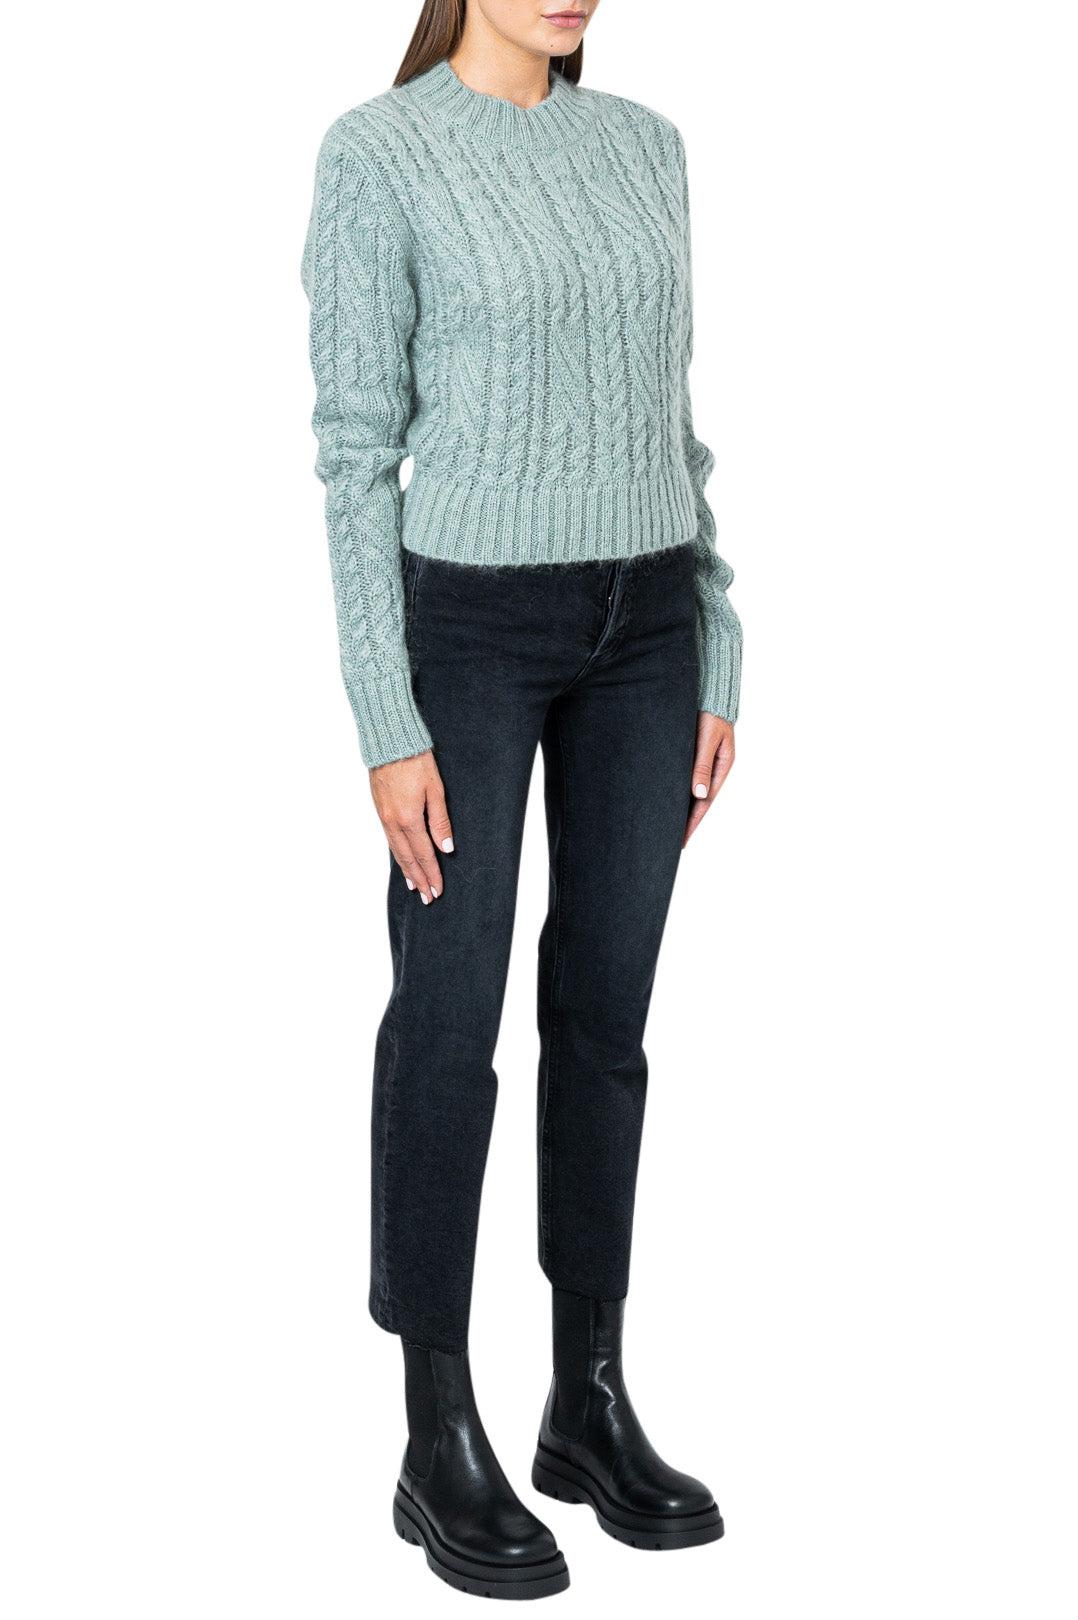 Aje-Knit cable wool sweater-21SS1161-dgallerystore